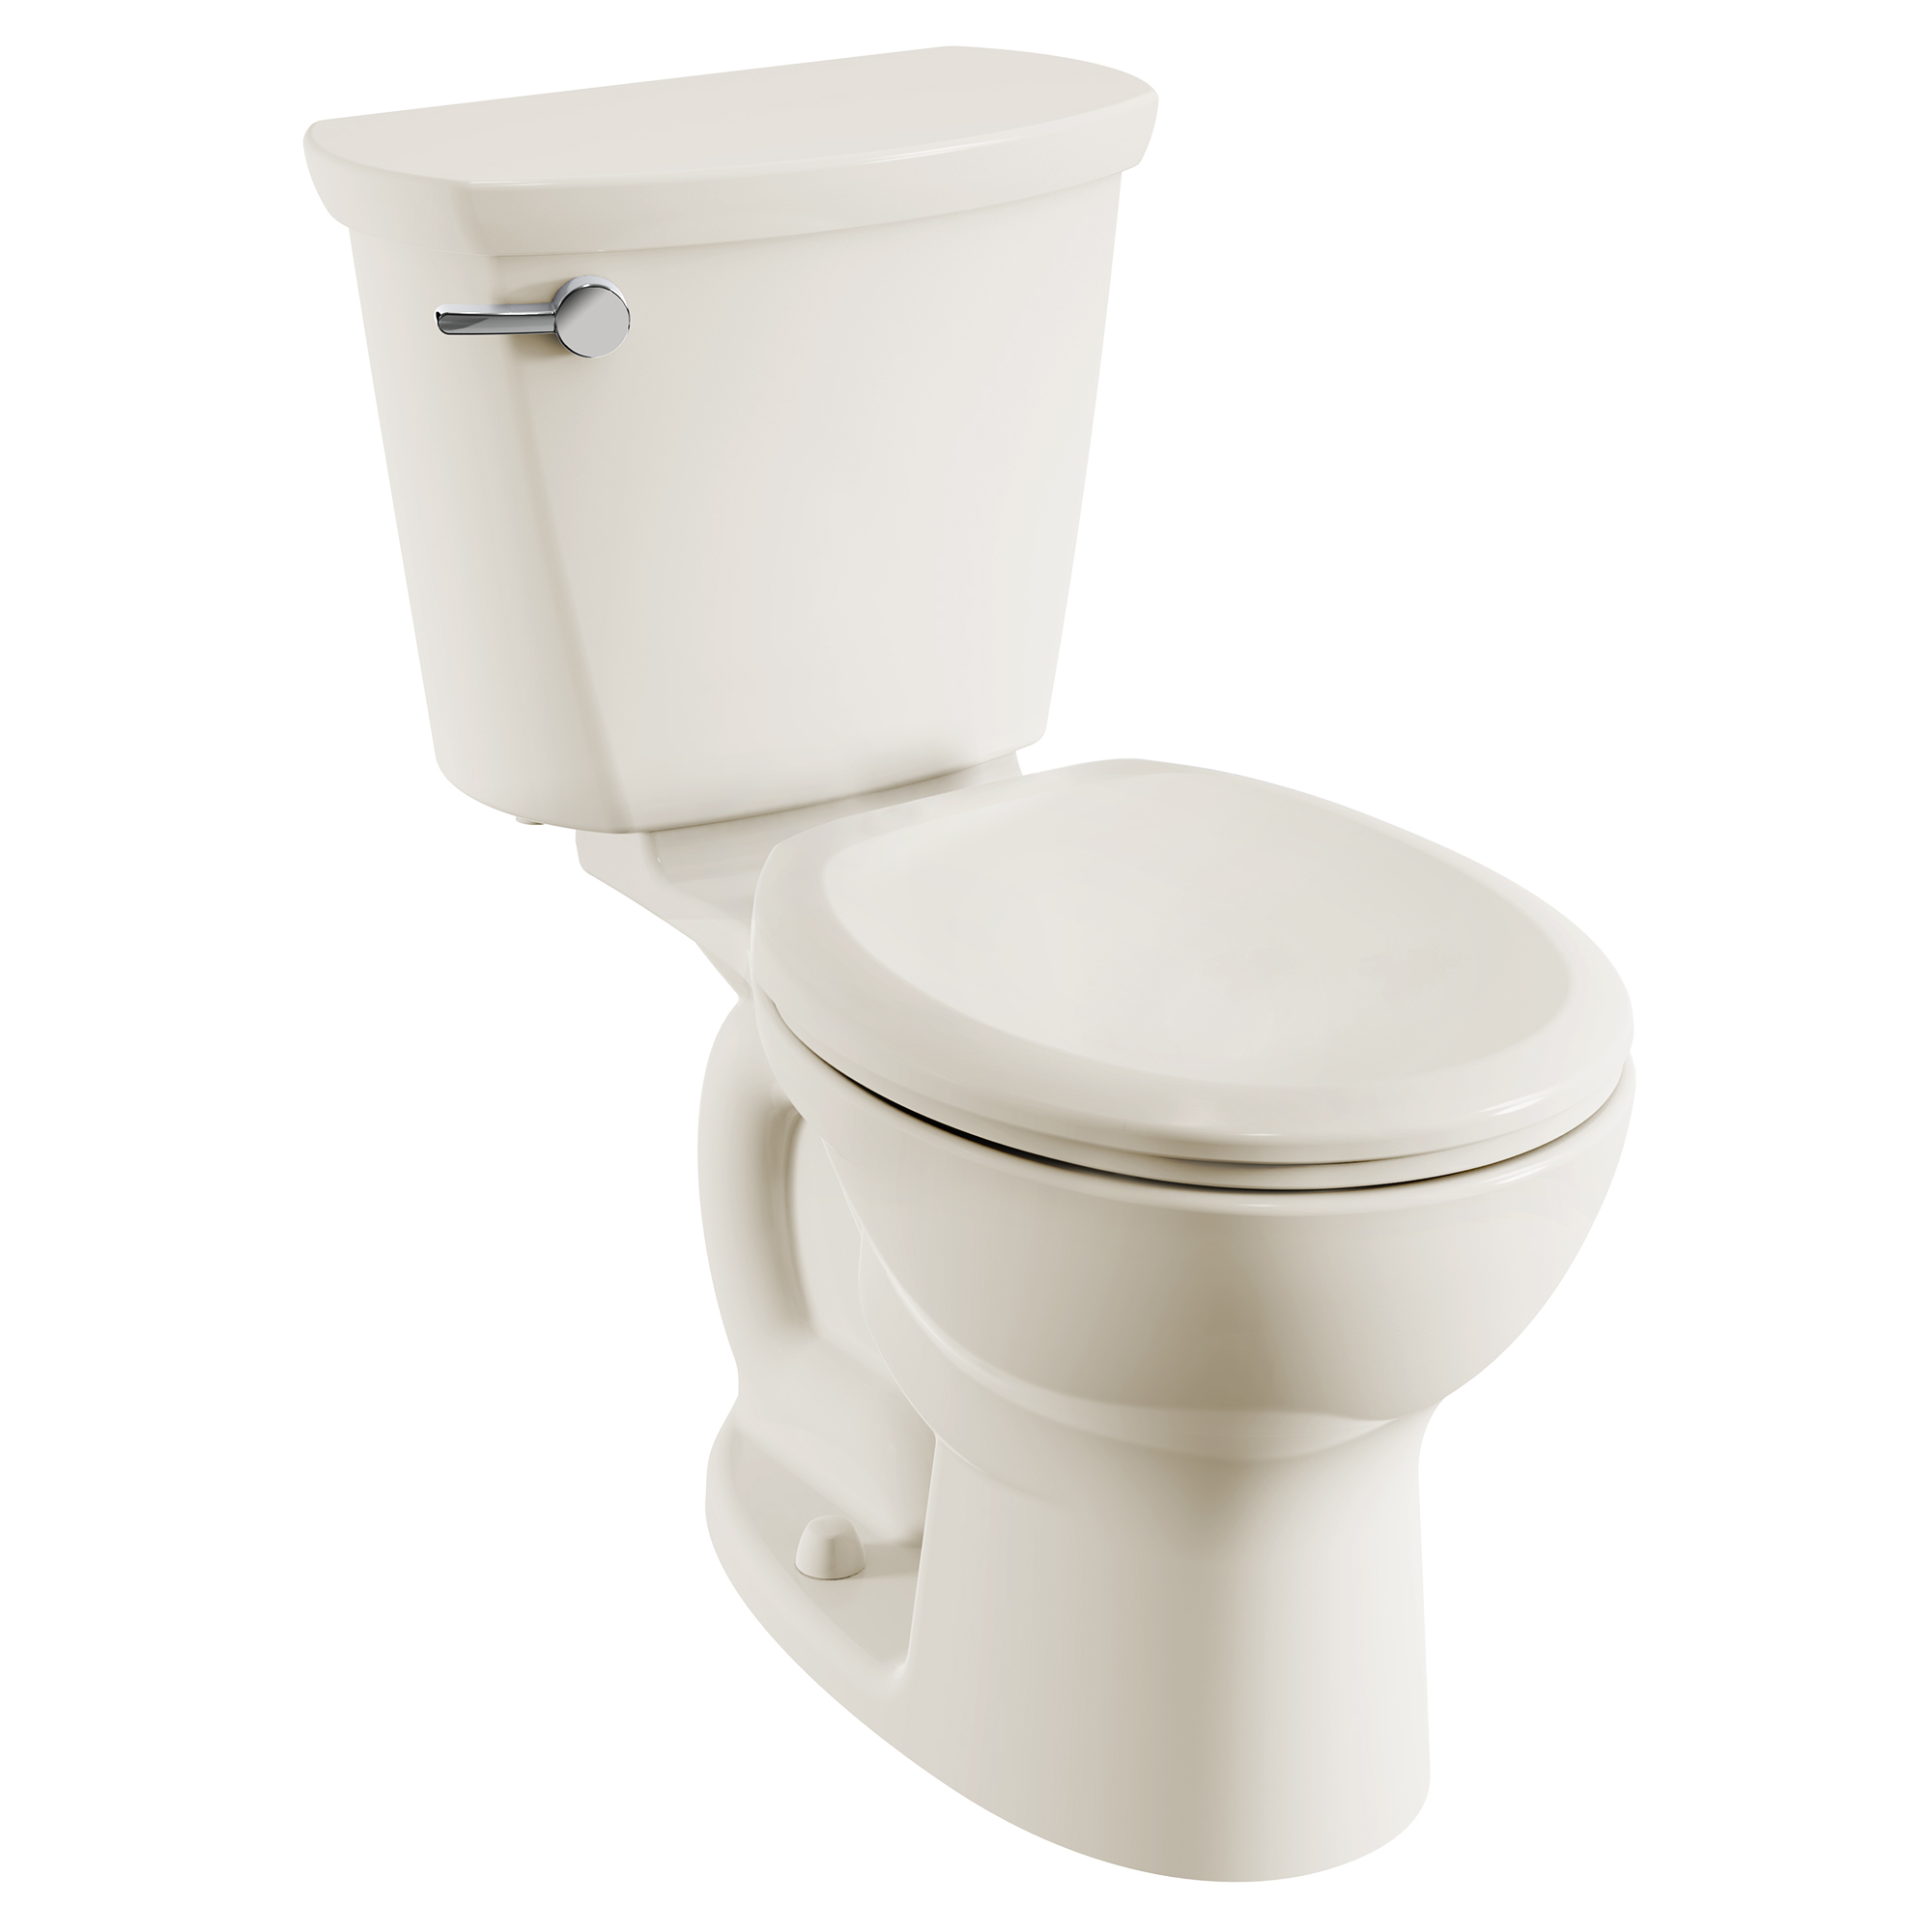 Cadet® PRO Two-Piece 1.28 gpf/4.8 Lpf Standard Height Round Front Toilet Less Seat